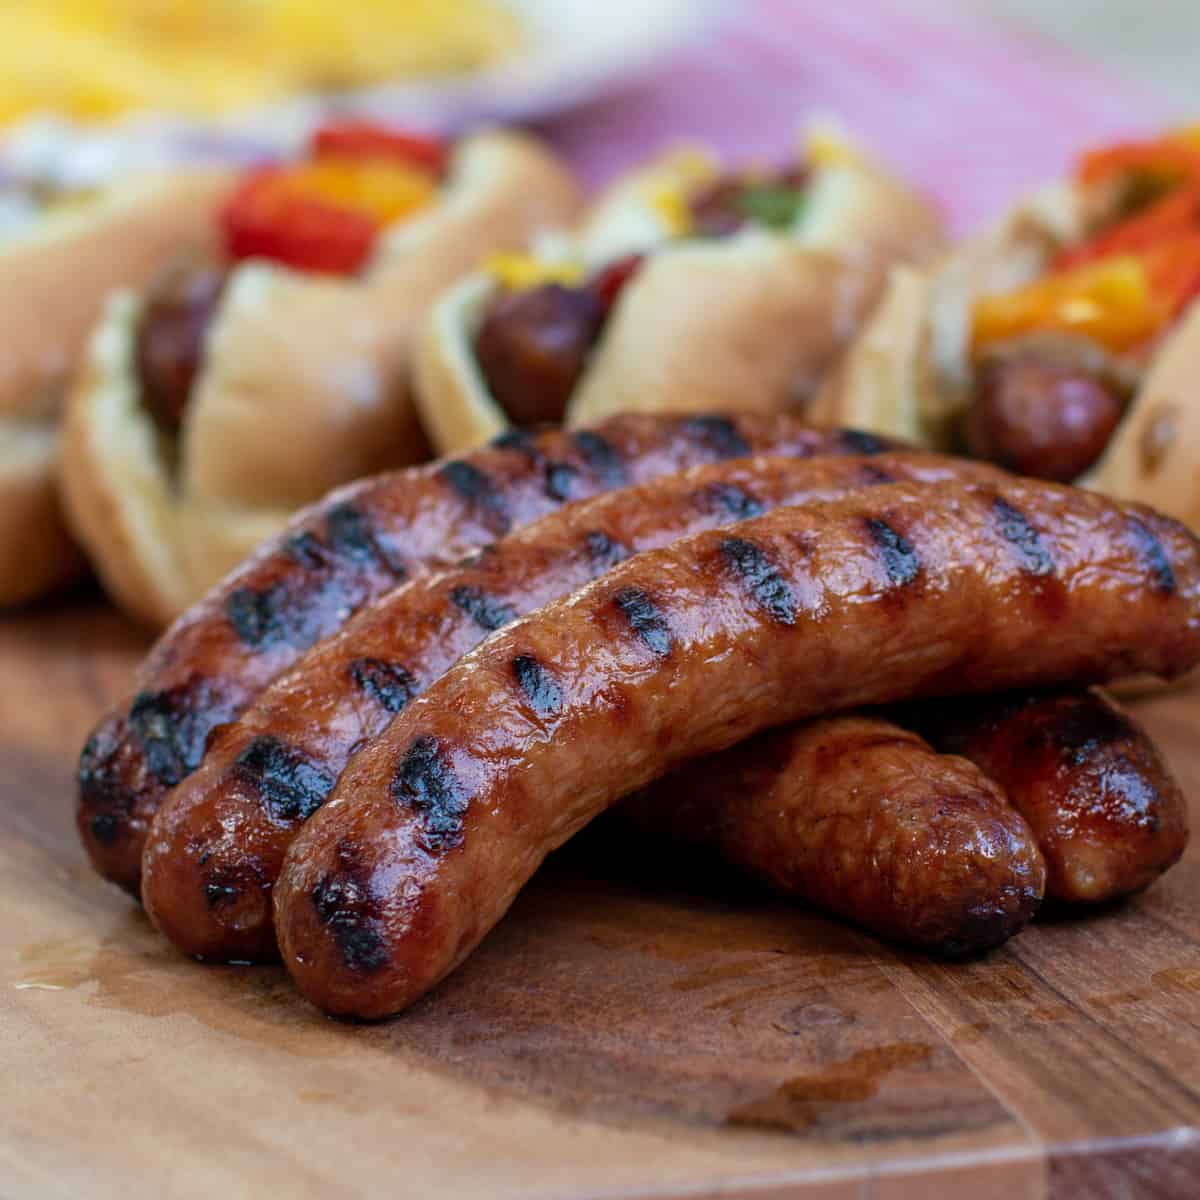 How Long to Cook Johnsonville Italian Sausage on Electric Grill How Long Does Johnsonville Italian Sausage Last In The Fridge